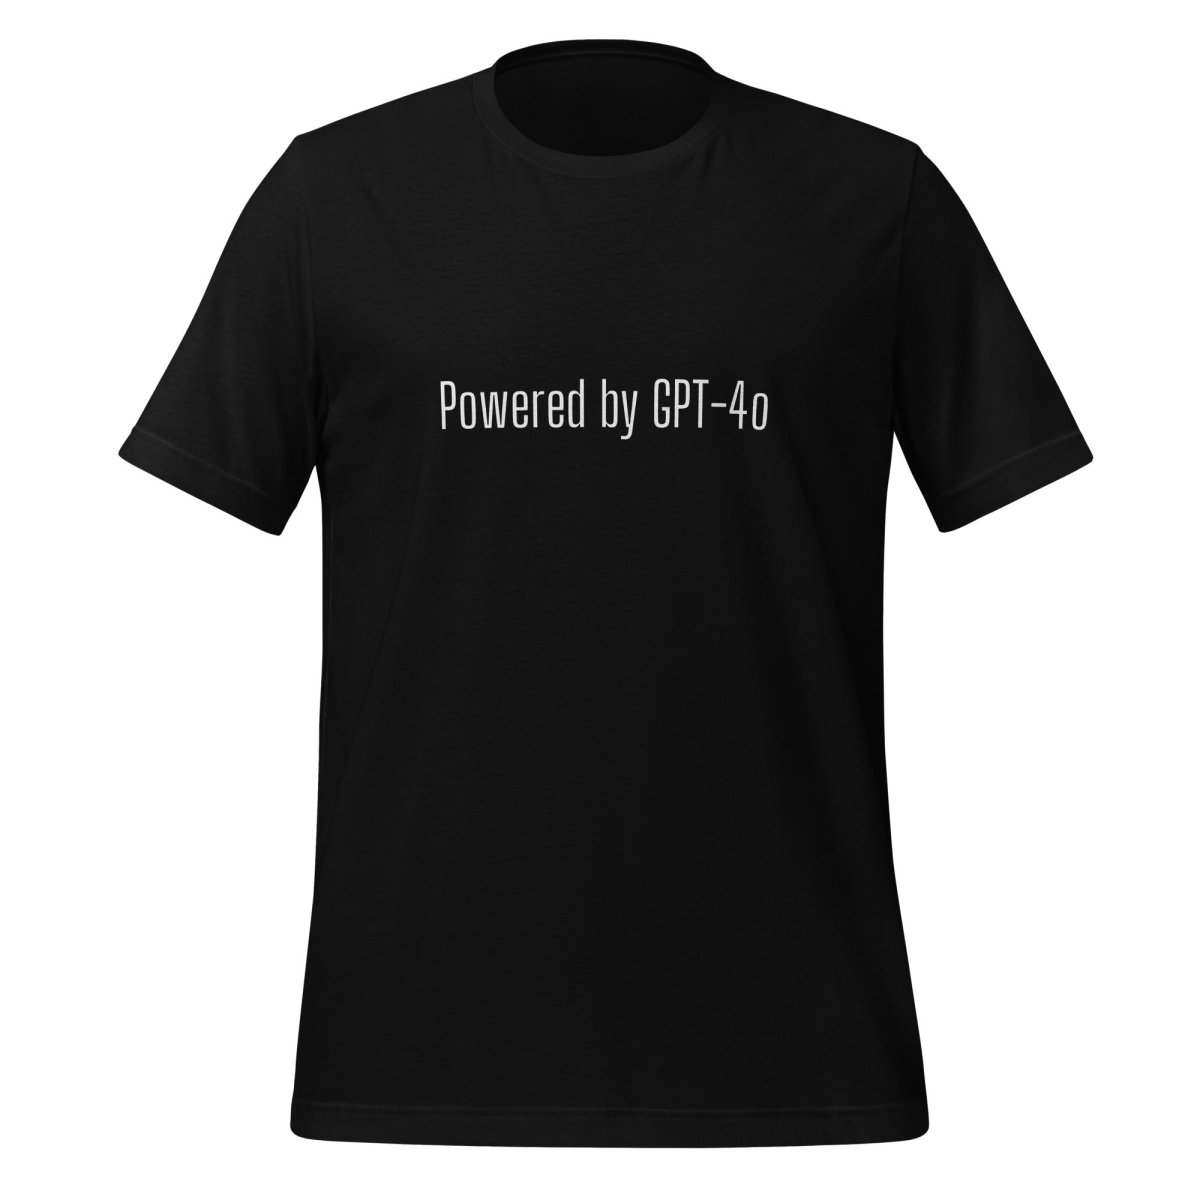 Powered by GPT - 4o T - Shirt 4 (unisex) - Black - AI Store